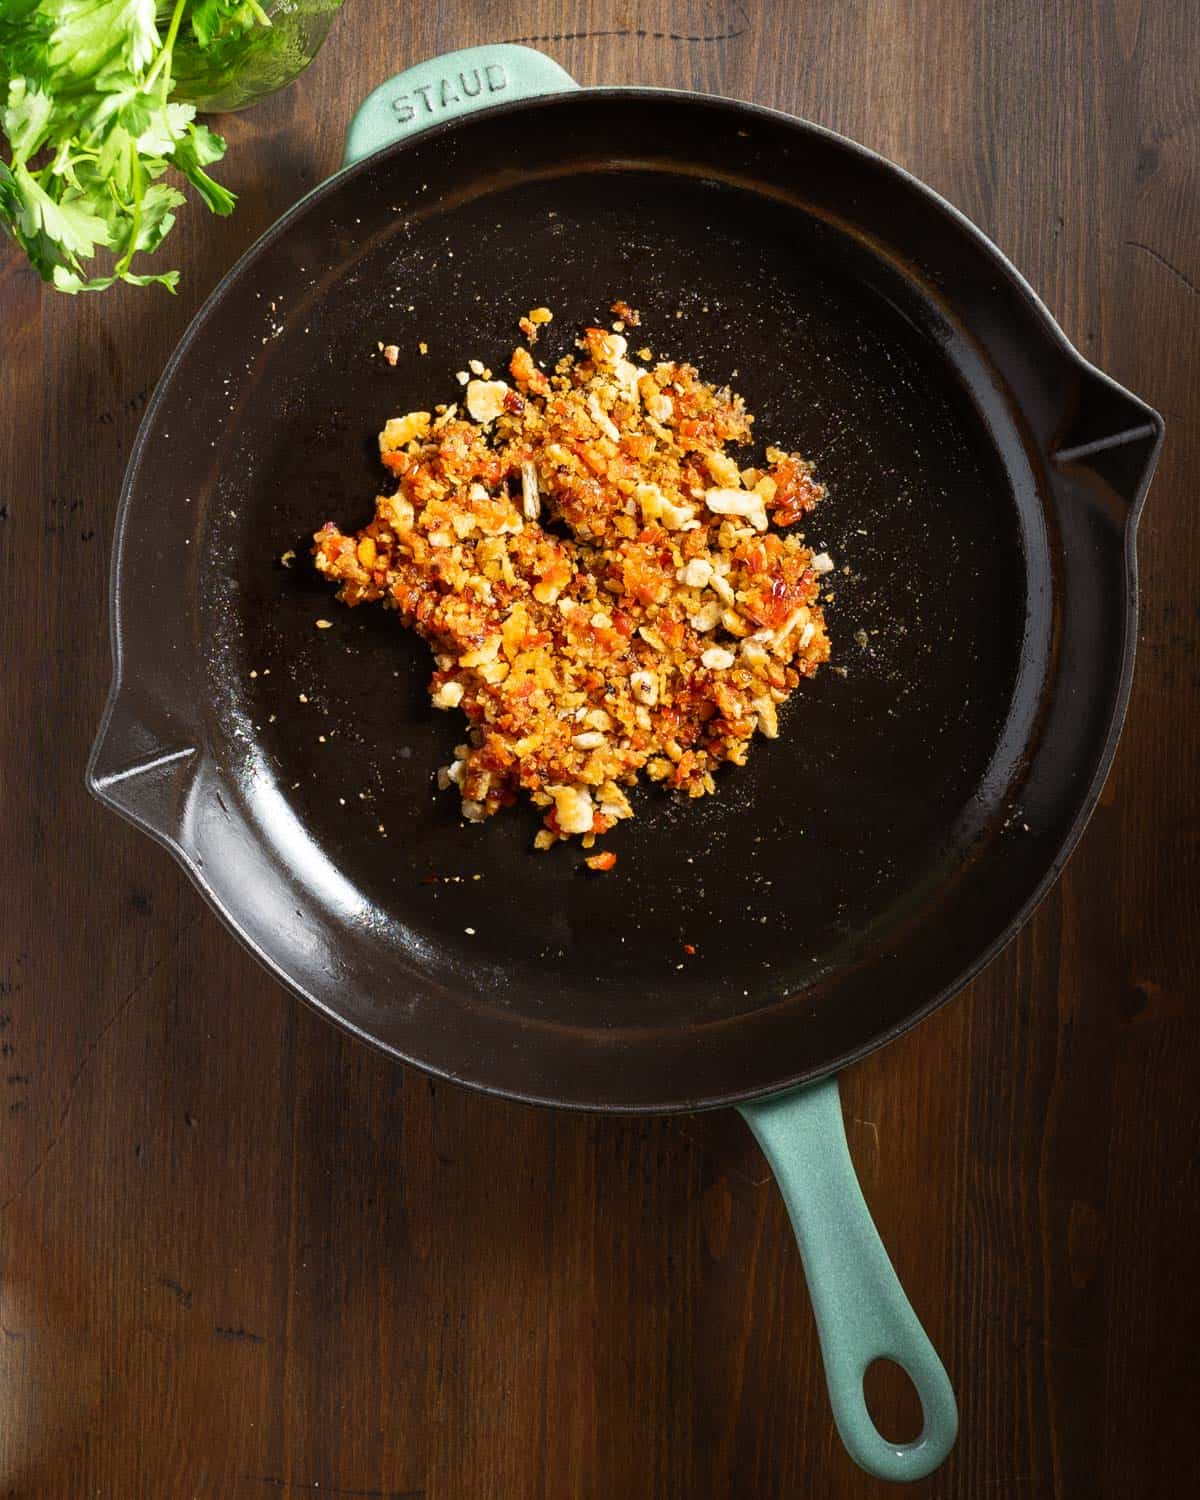 Sautéed shallots and red peppers with cracker crumbs in a skillet.